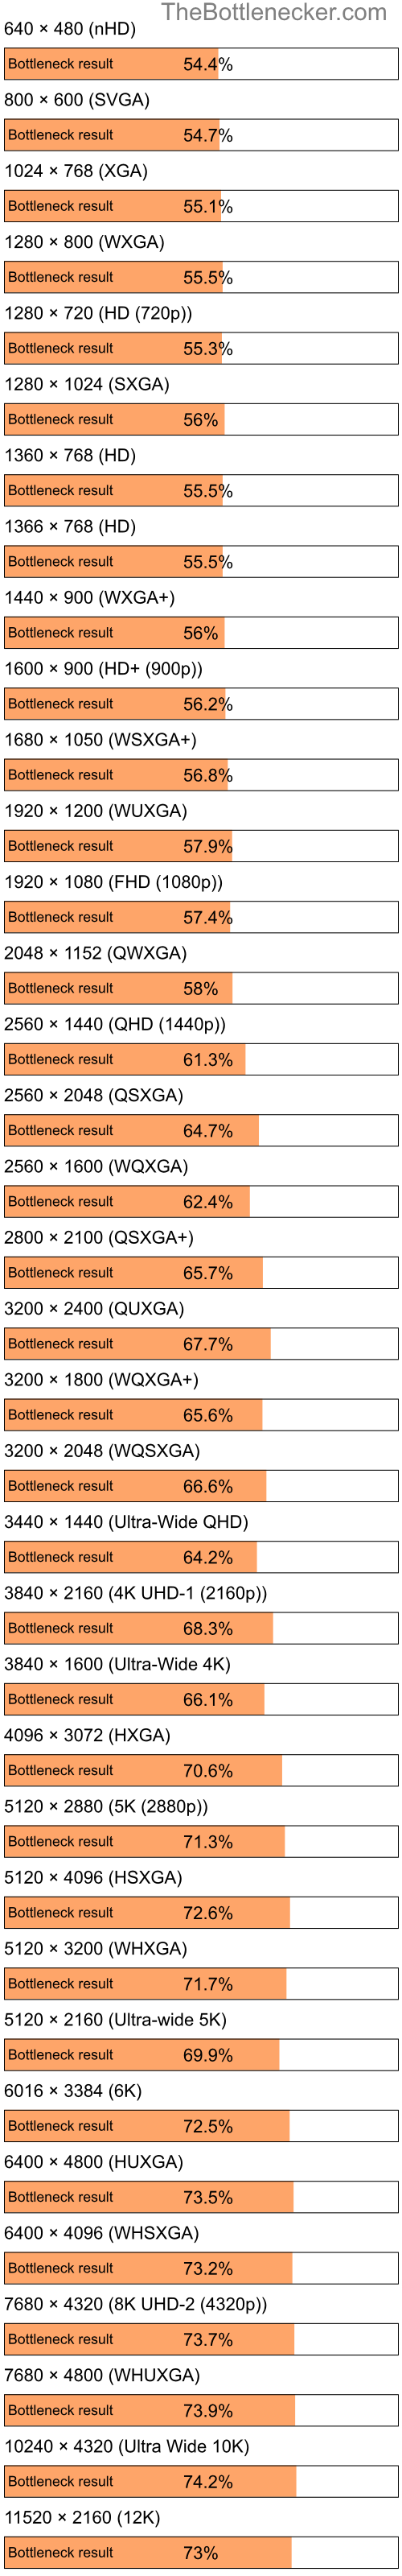 Bottleneck results by resolution for Intel Pentium 4 and NVIDIA GeForce G210 in Processor Intense Tasks